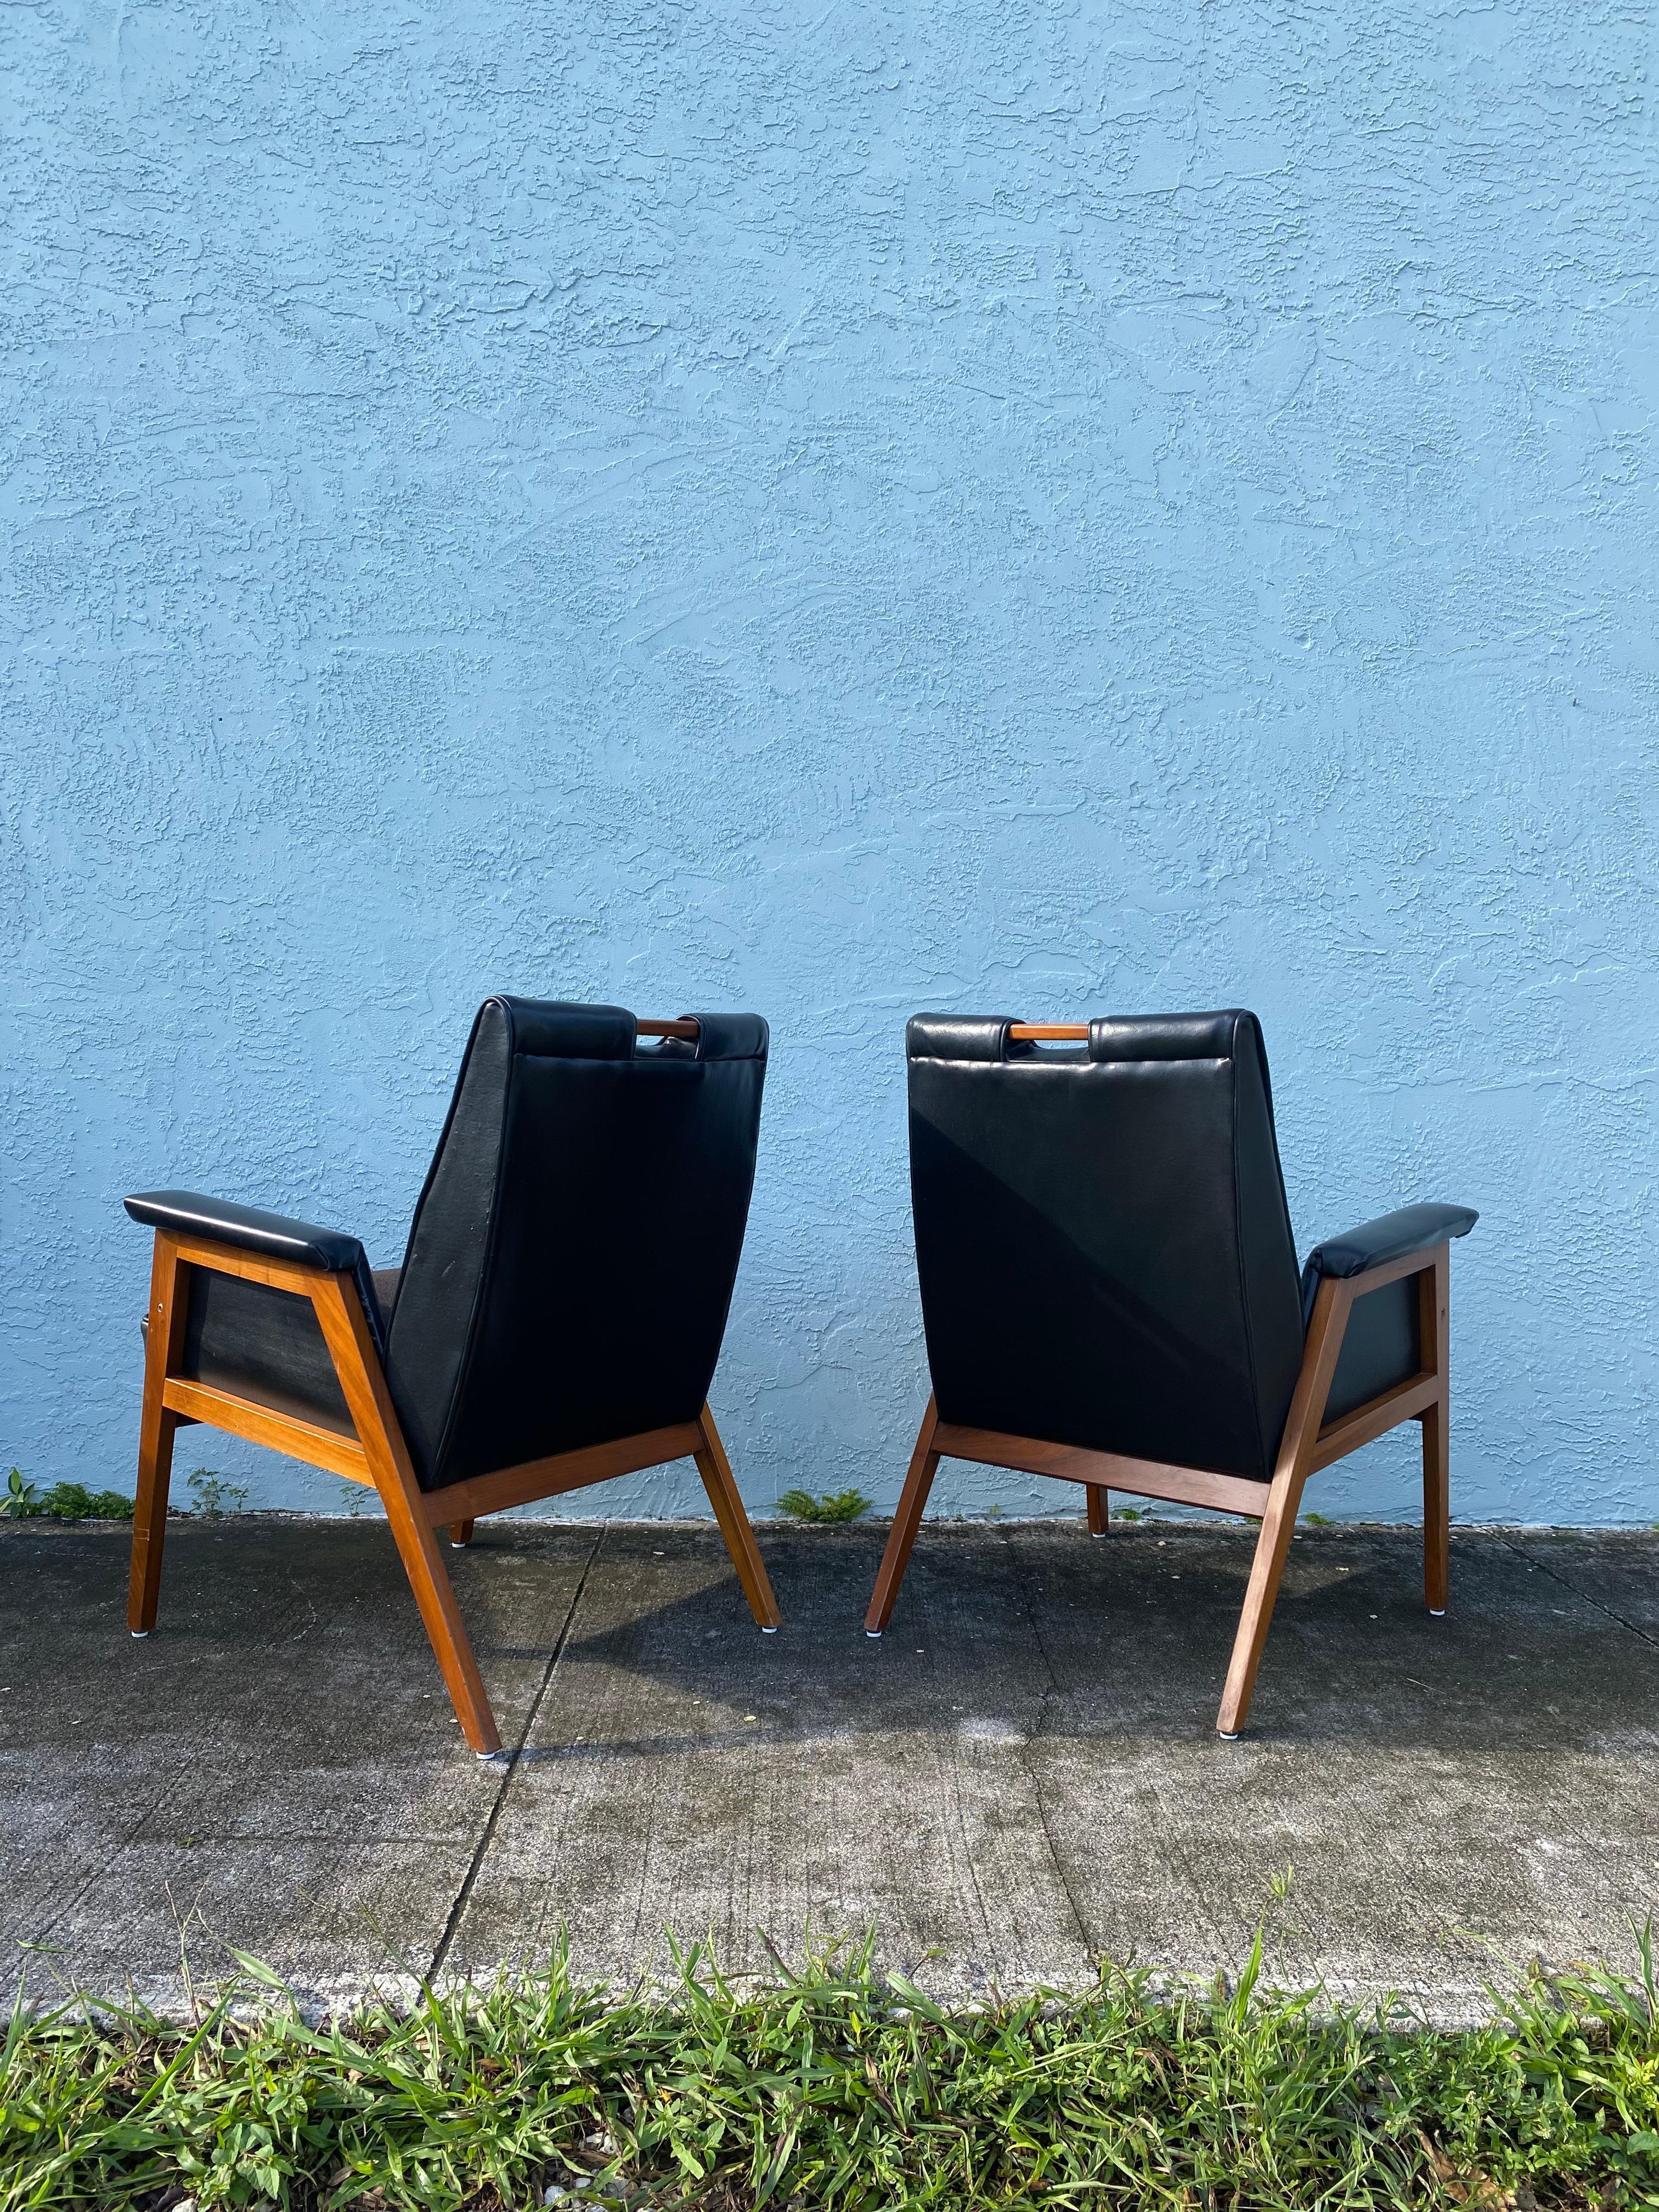 1960s Finn Julh Danish Walnut Leather Sculptural Chairs, Set of 2 In Good Condition For Sale In Fort Lauderdale, FL